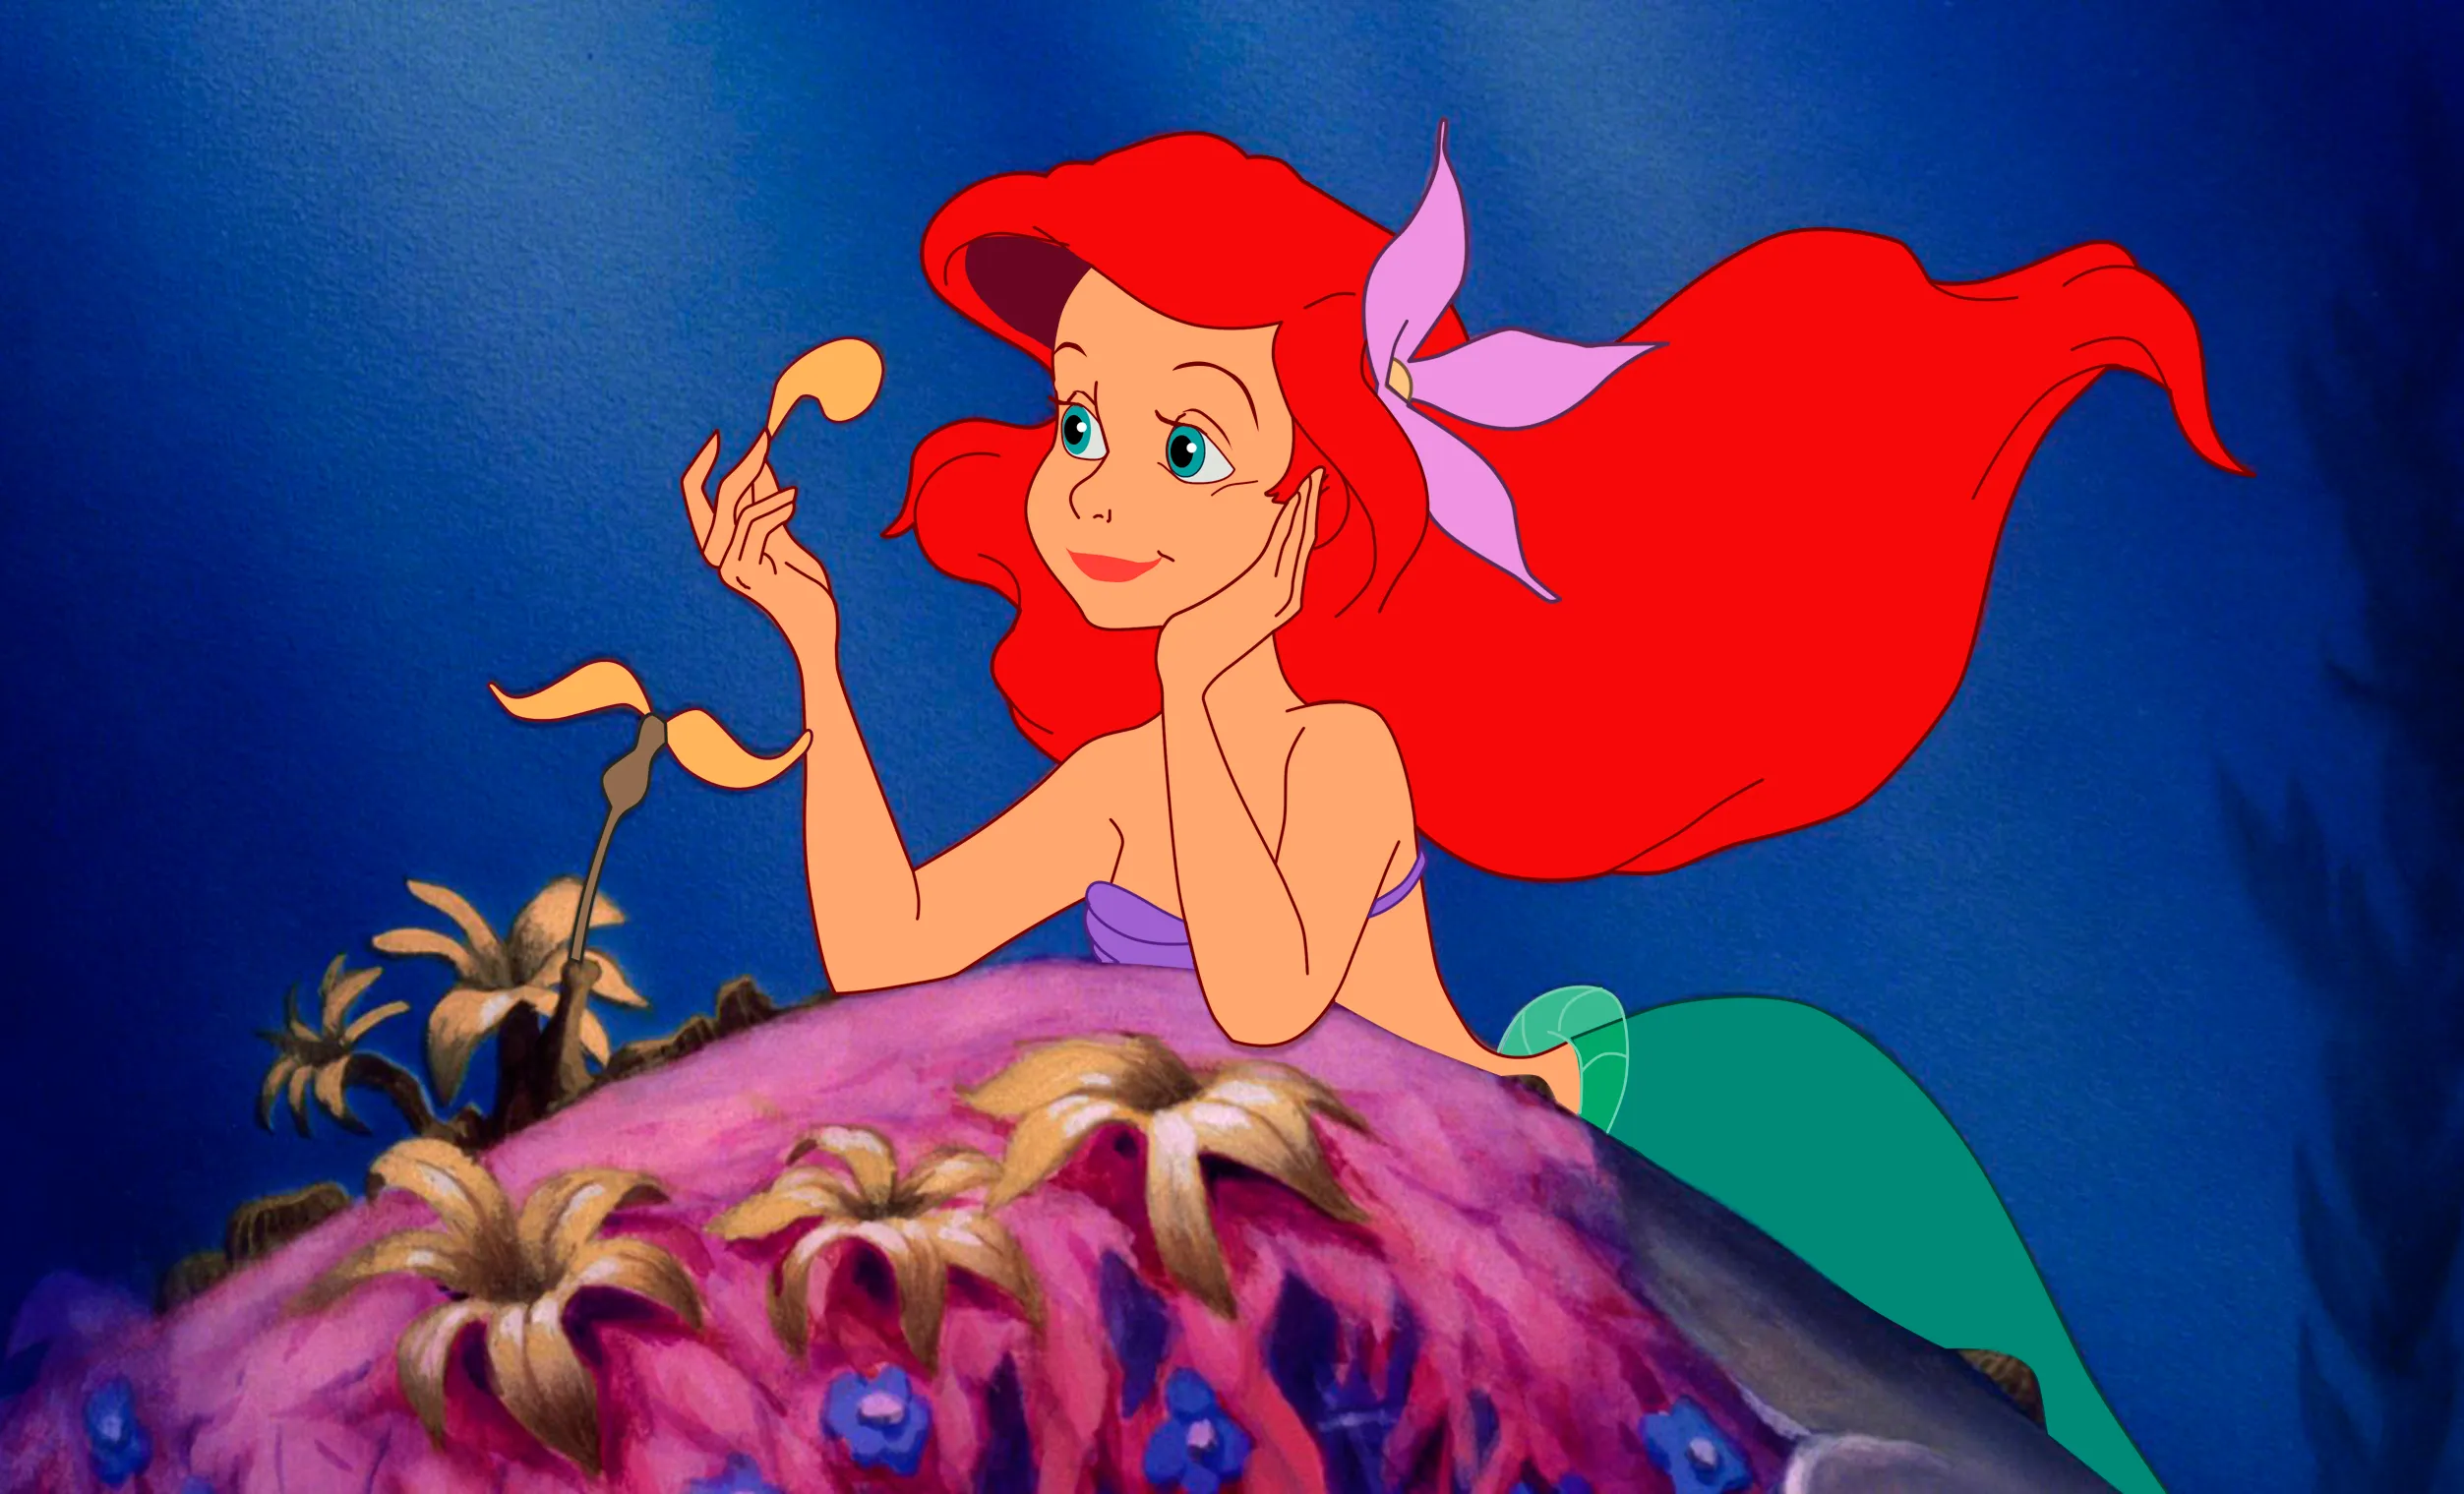 Ariel in "The LIttle Mermaid" looking at a plant petal while learning on a rock.